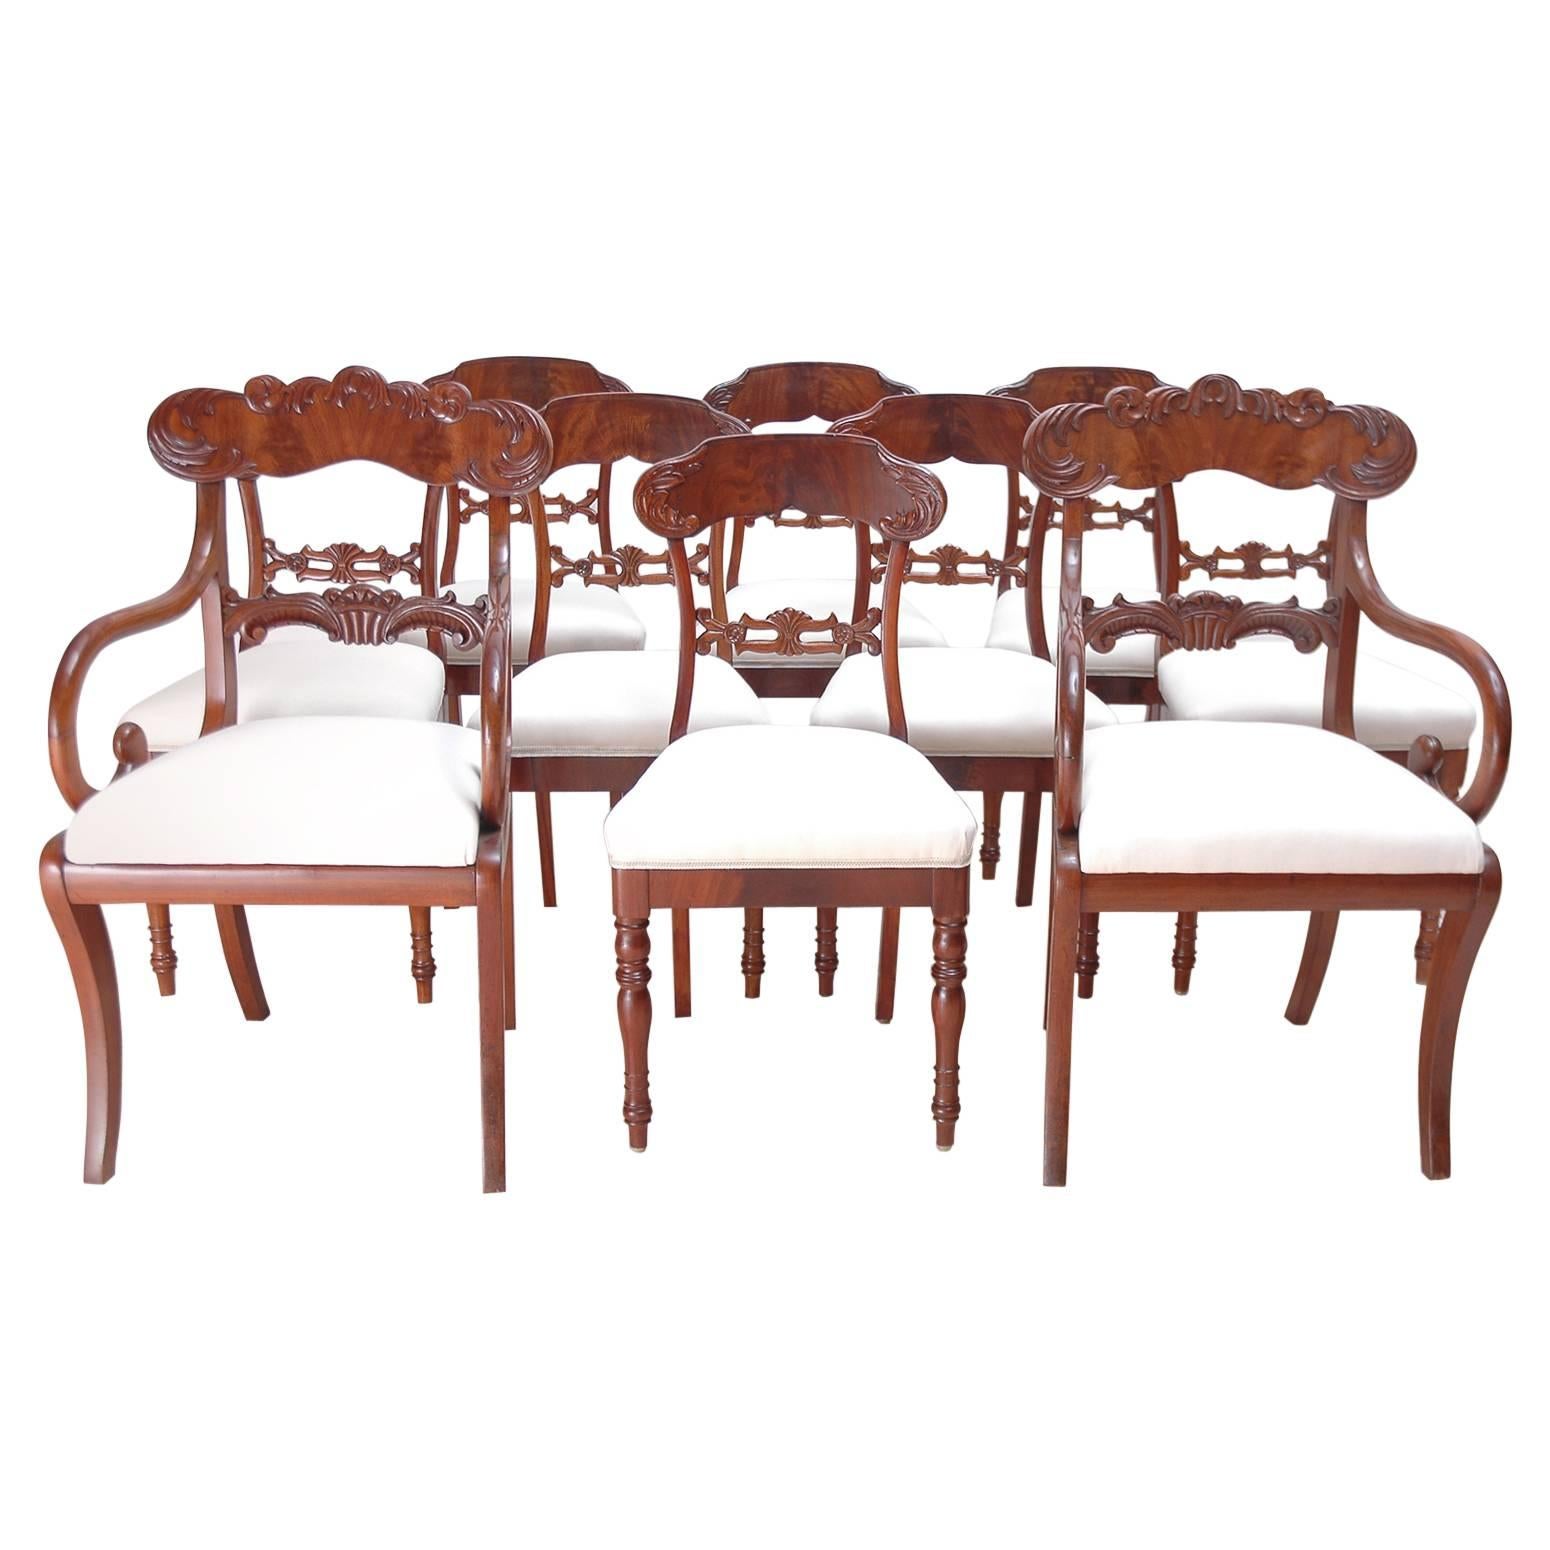 A set of ten Karl Johan dining chairs comprising of eight side chairs and a pair of armchairs in West Indies mahogany with carved back splat and crest rail with foliate design of acanthus leaves. Side chairs feature turned front legs with saber rear